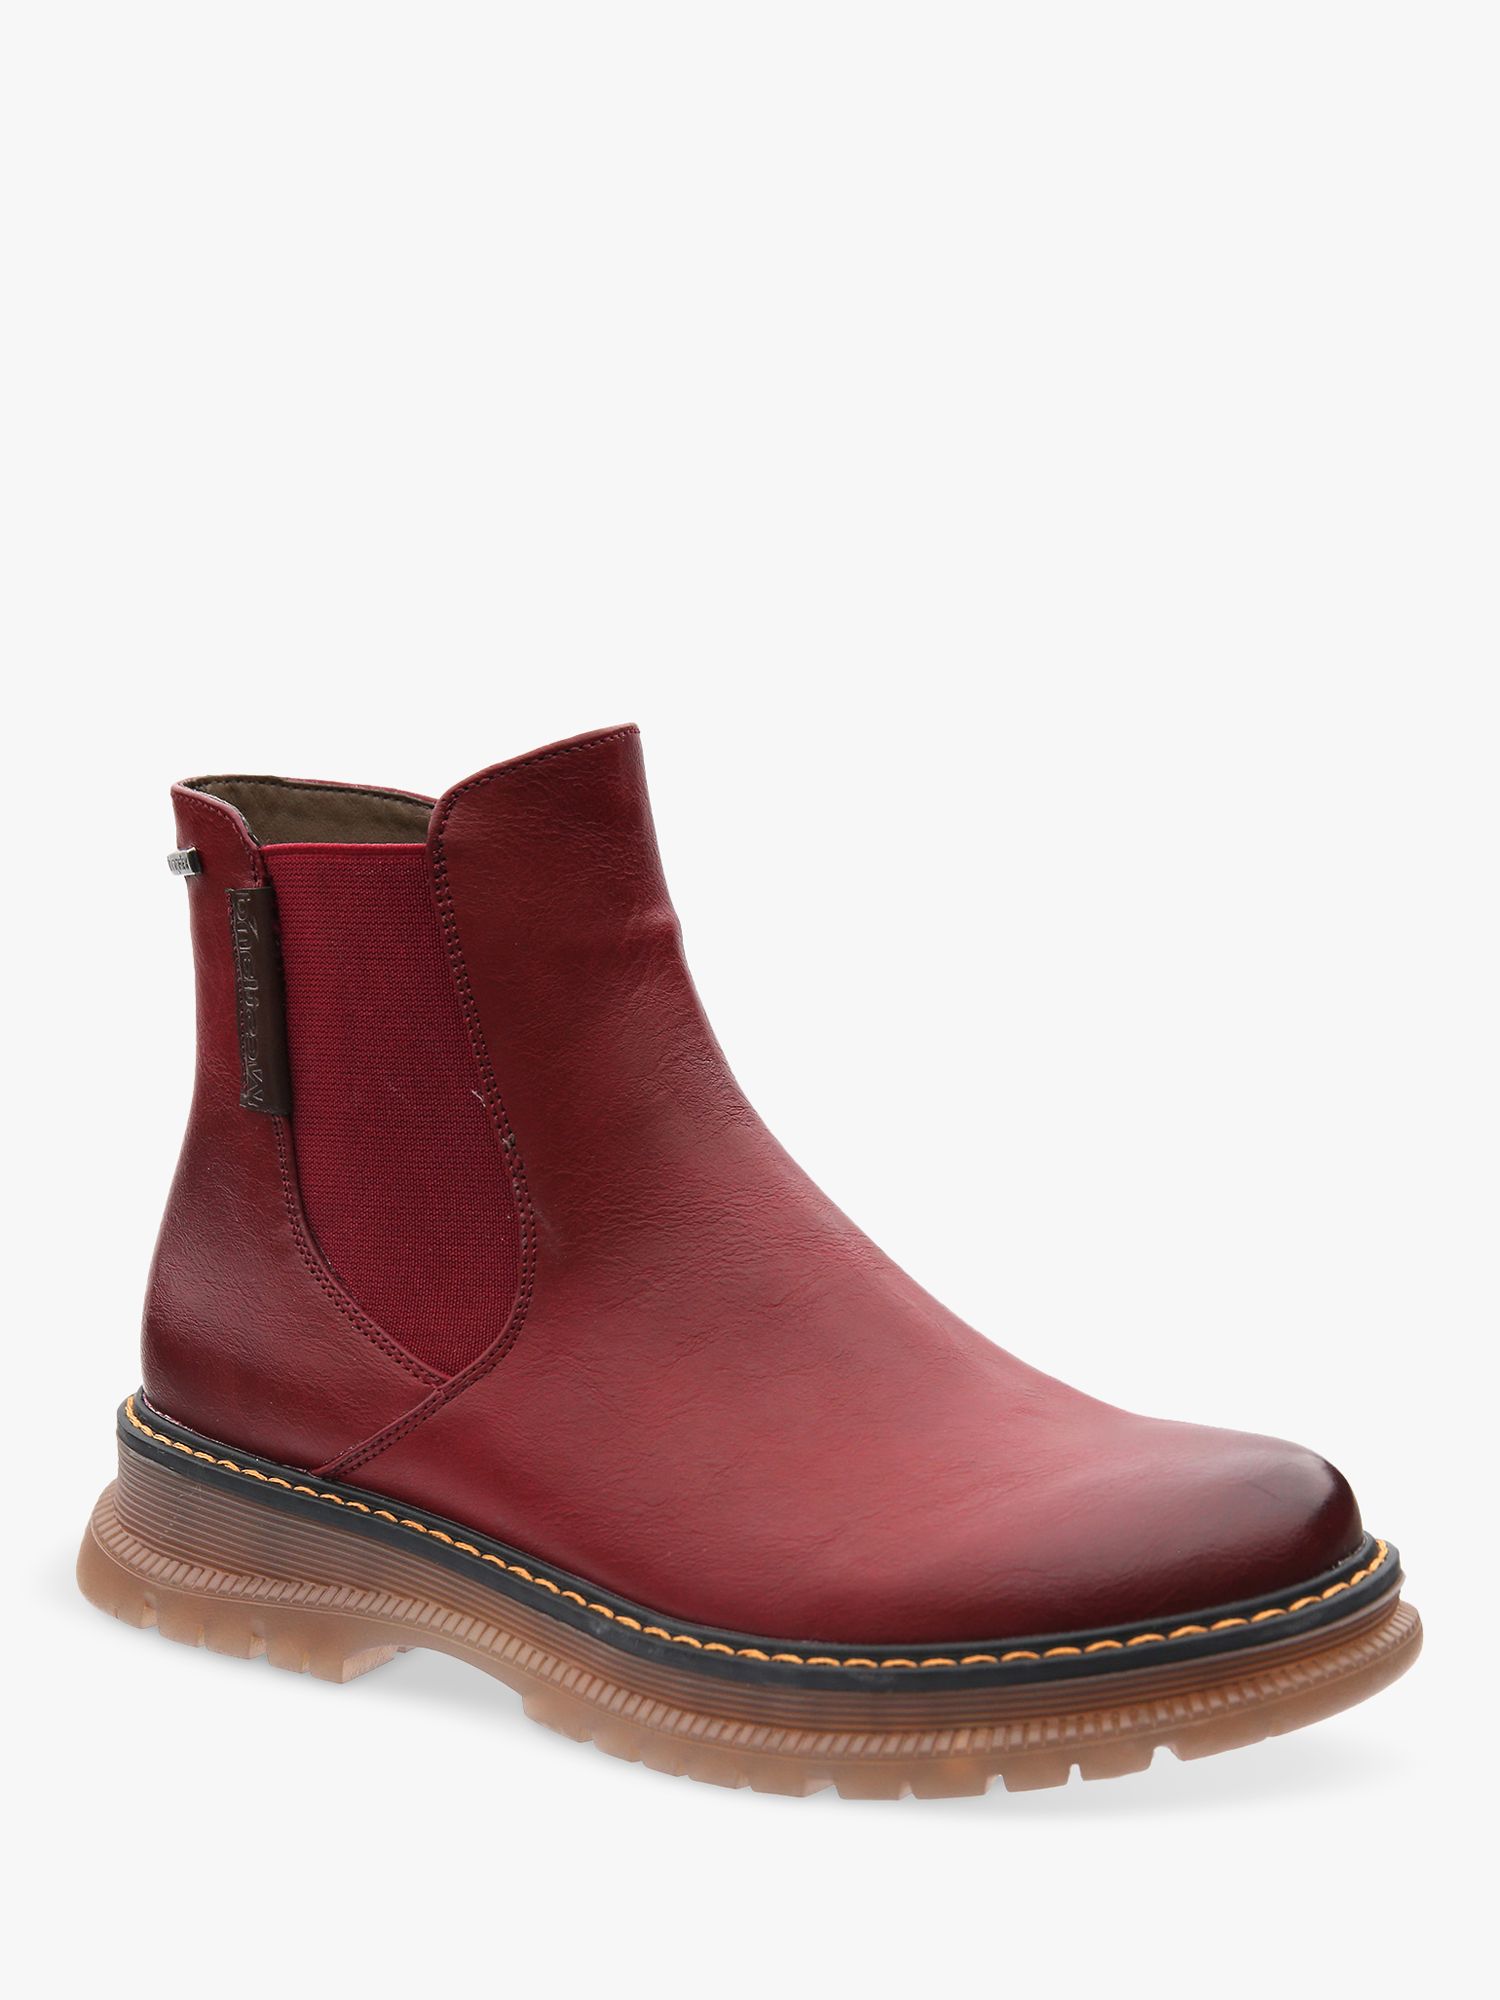 Westland by Josef Seibel Peyton 02 Chelsea Boots, Red, 3